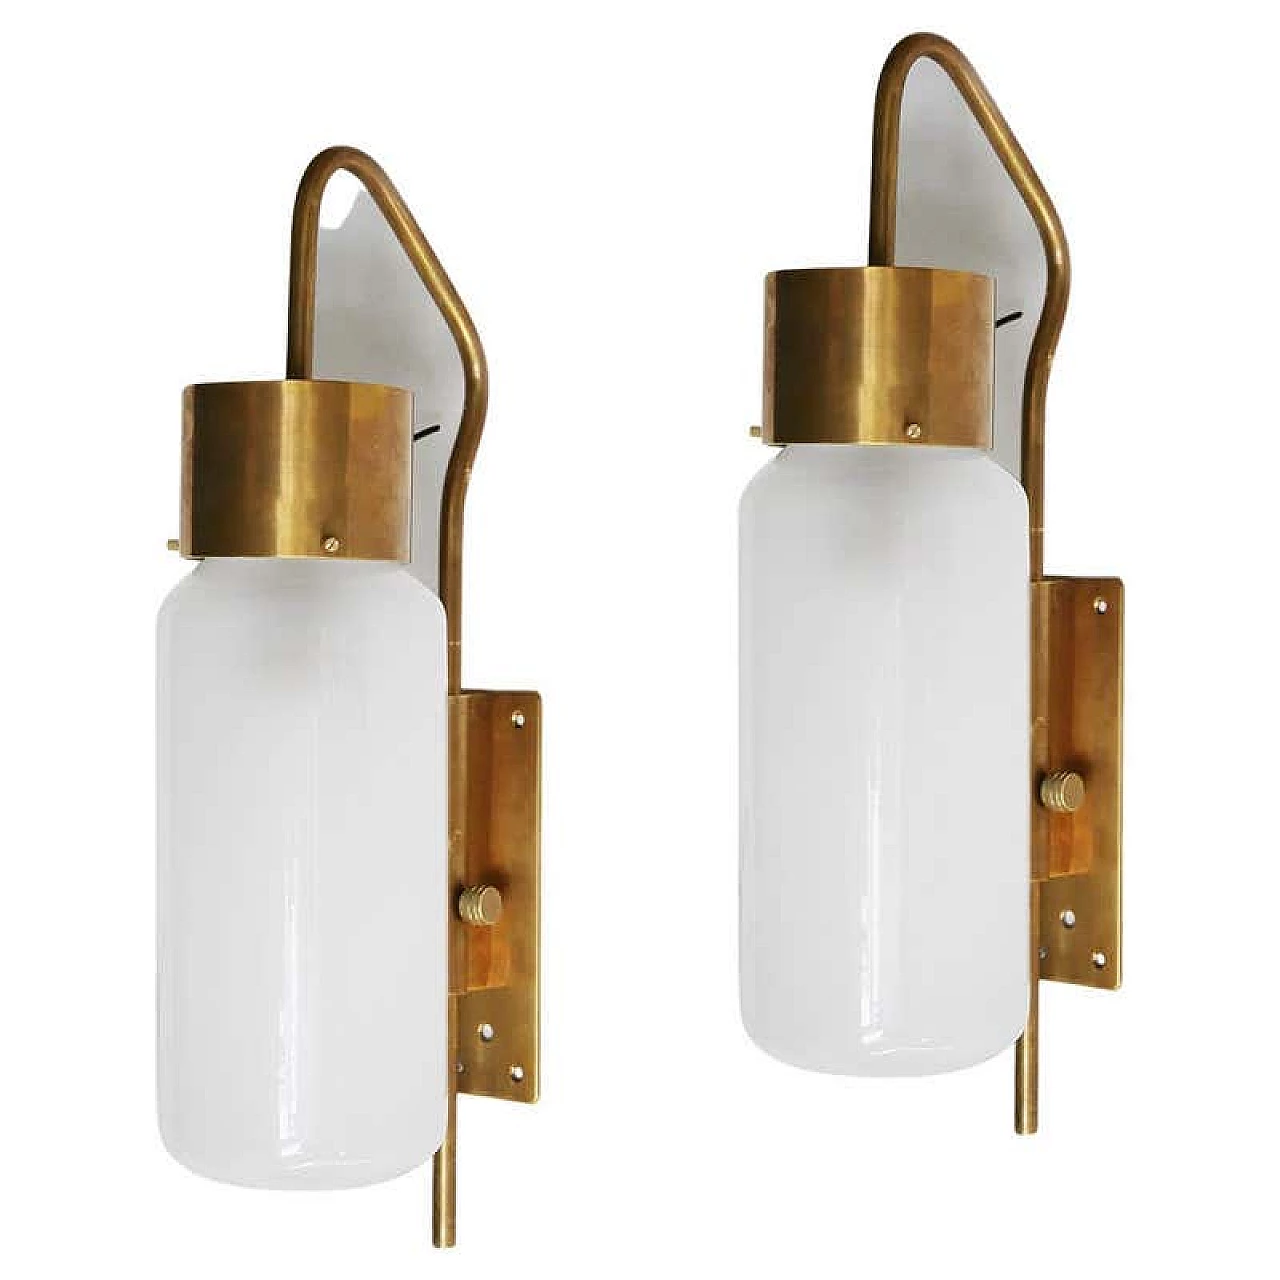 Pair of wall sconces by Luigi Caccia Dominioni for Azucena, 1950s 1380225